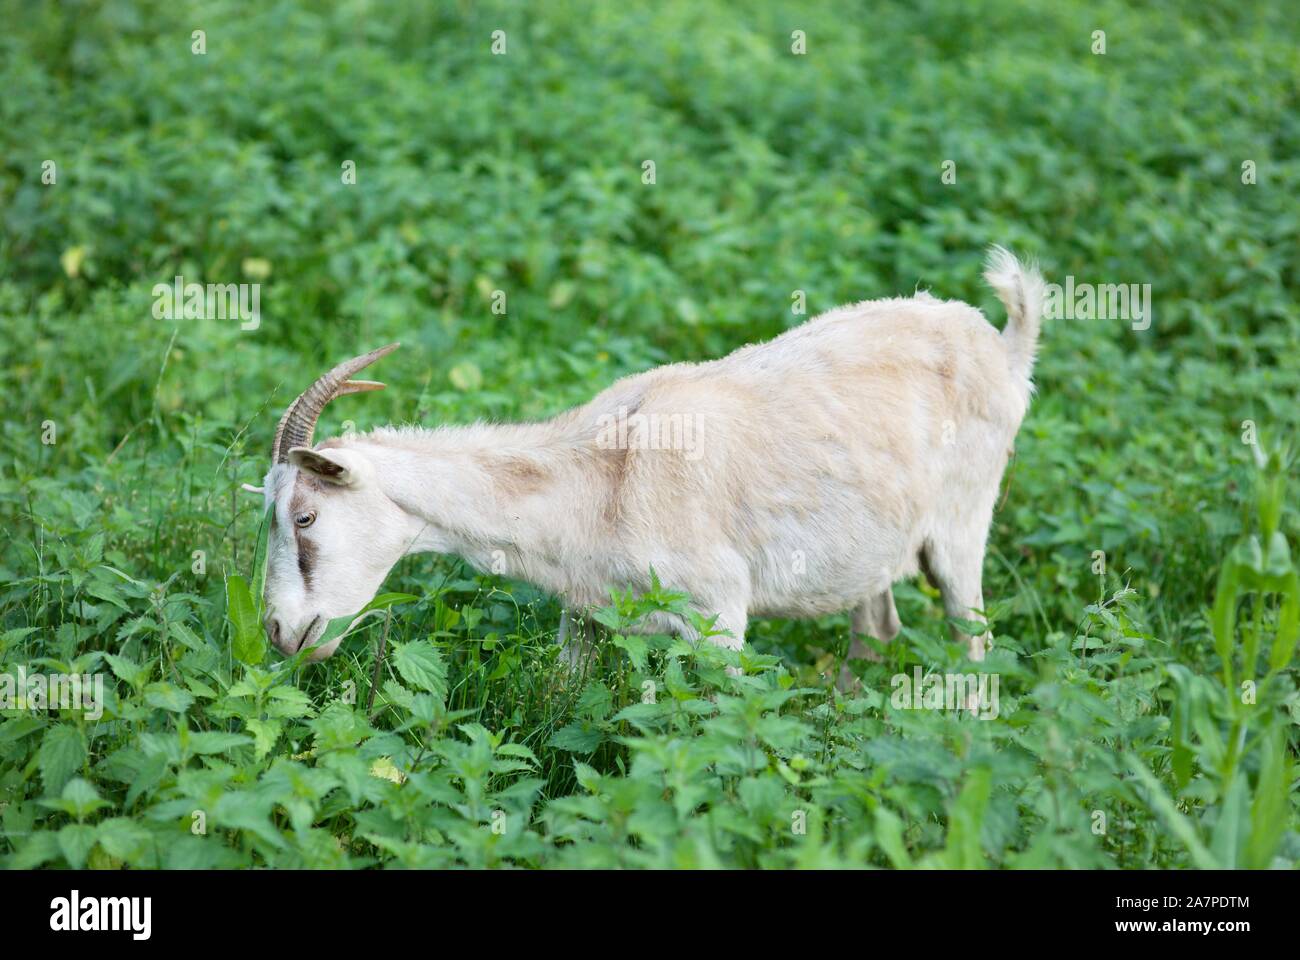 Side view of grazing goat Stock Photo